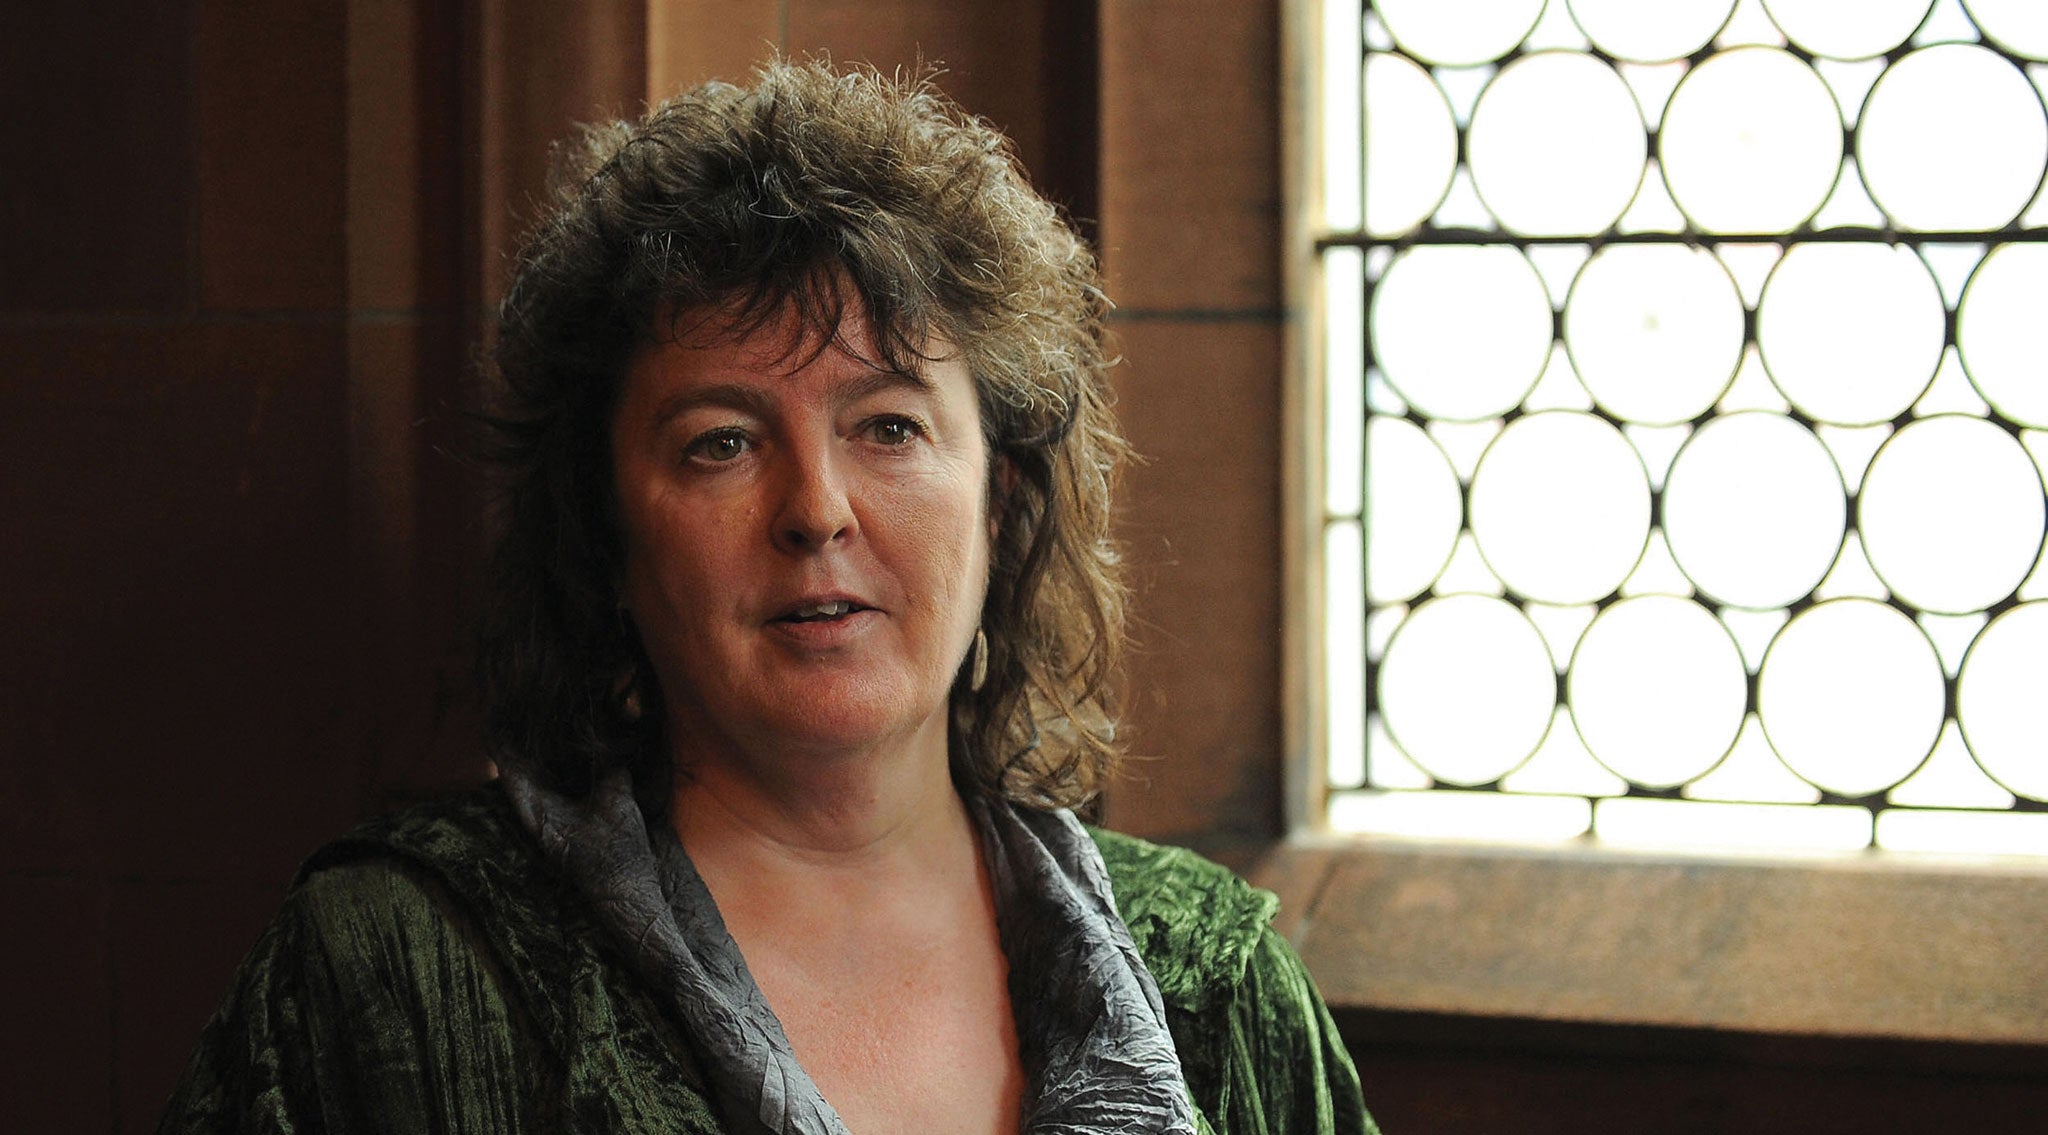 Poet Laureate Carol Ann Duffy dedicated her nativity story to Camilla Elworthy, one of Picador's longest-serving publicists